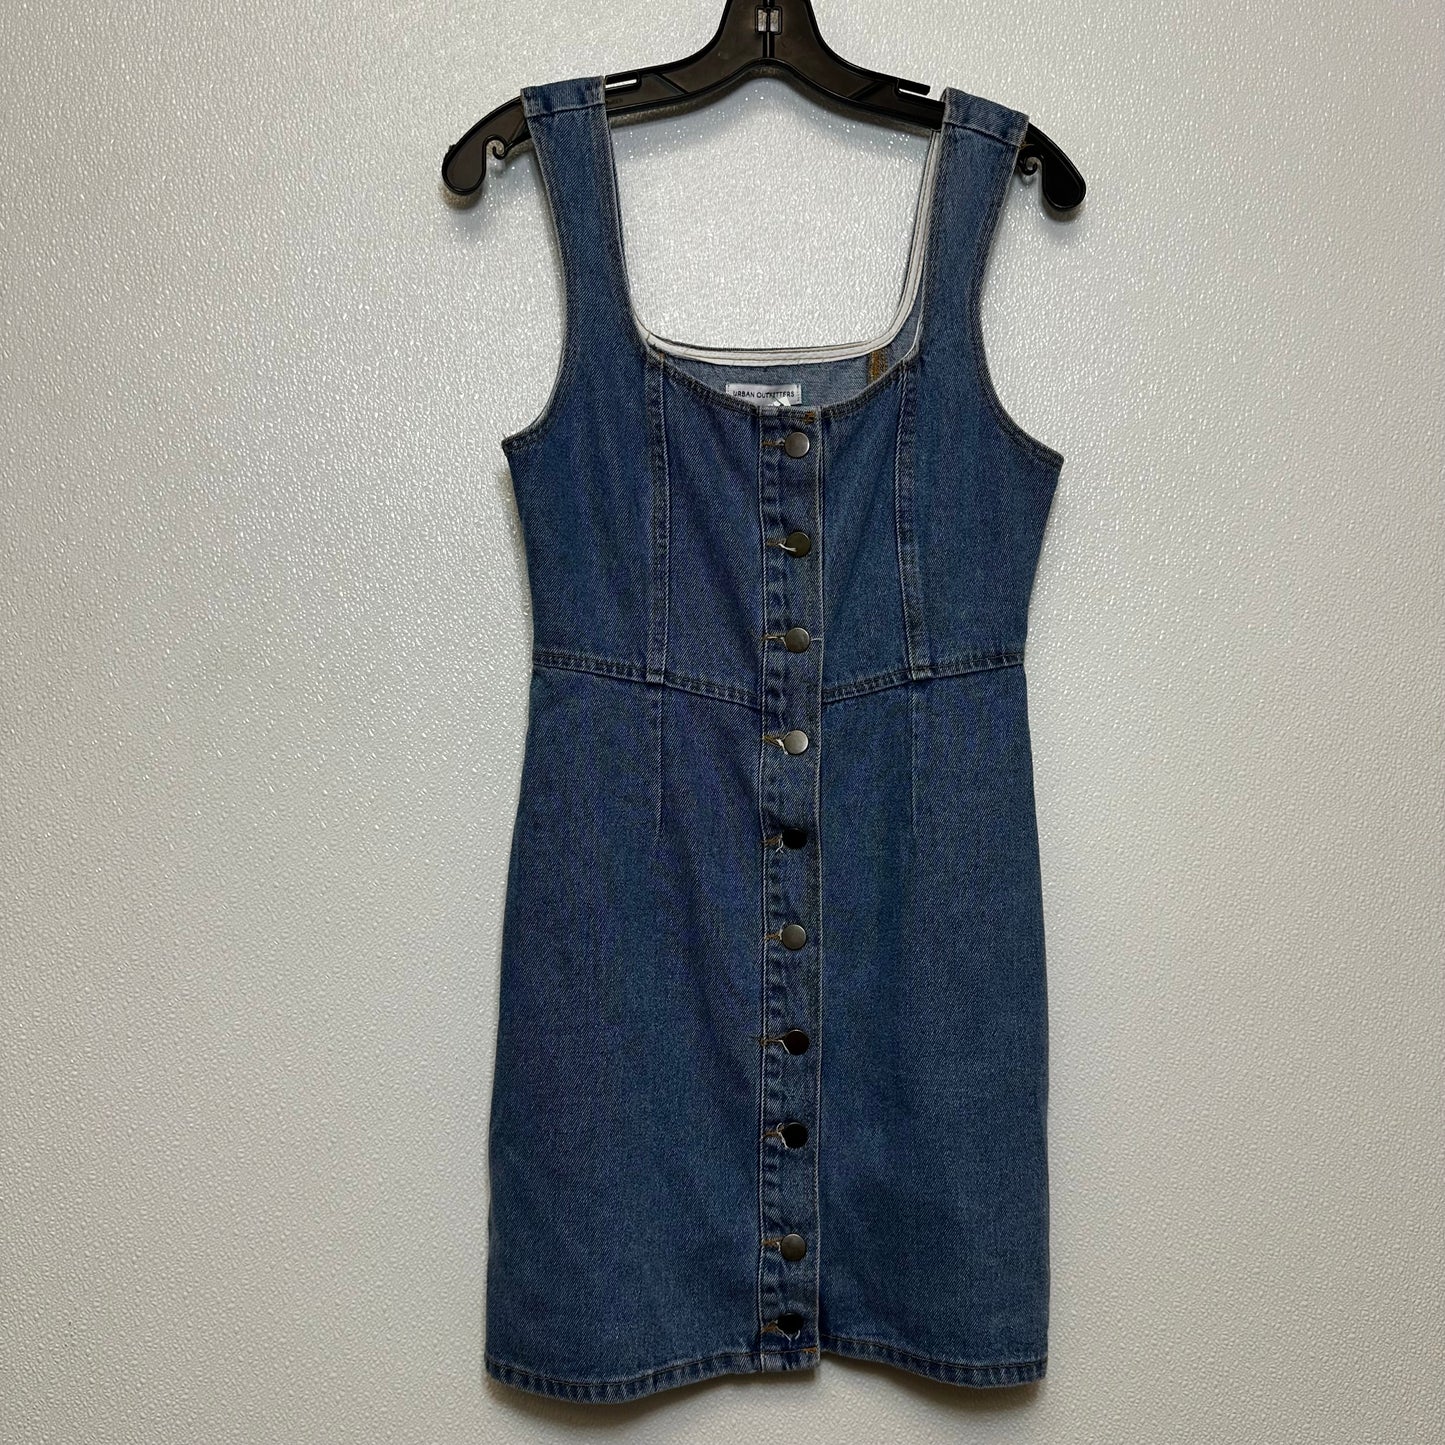 Denim Dress Casual Short Urban Outfitters, Size 6